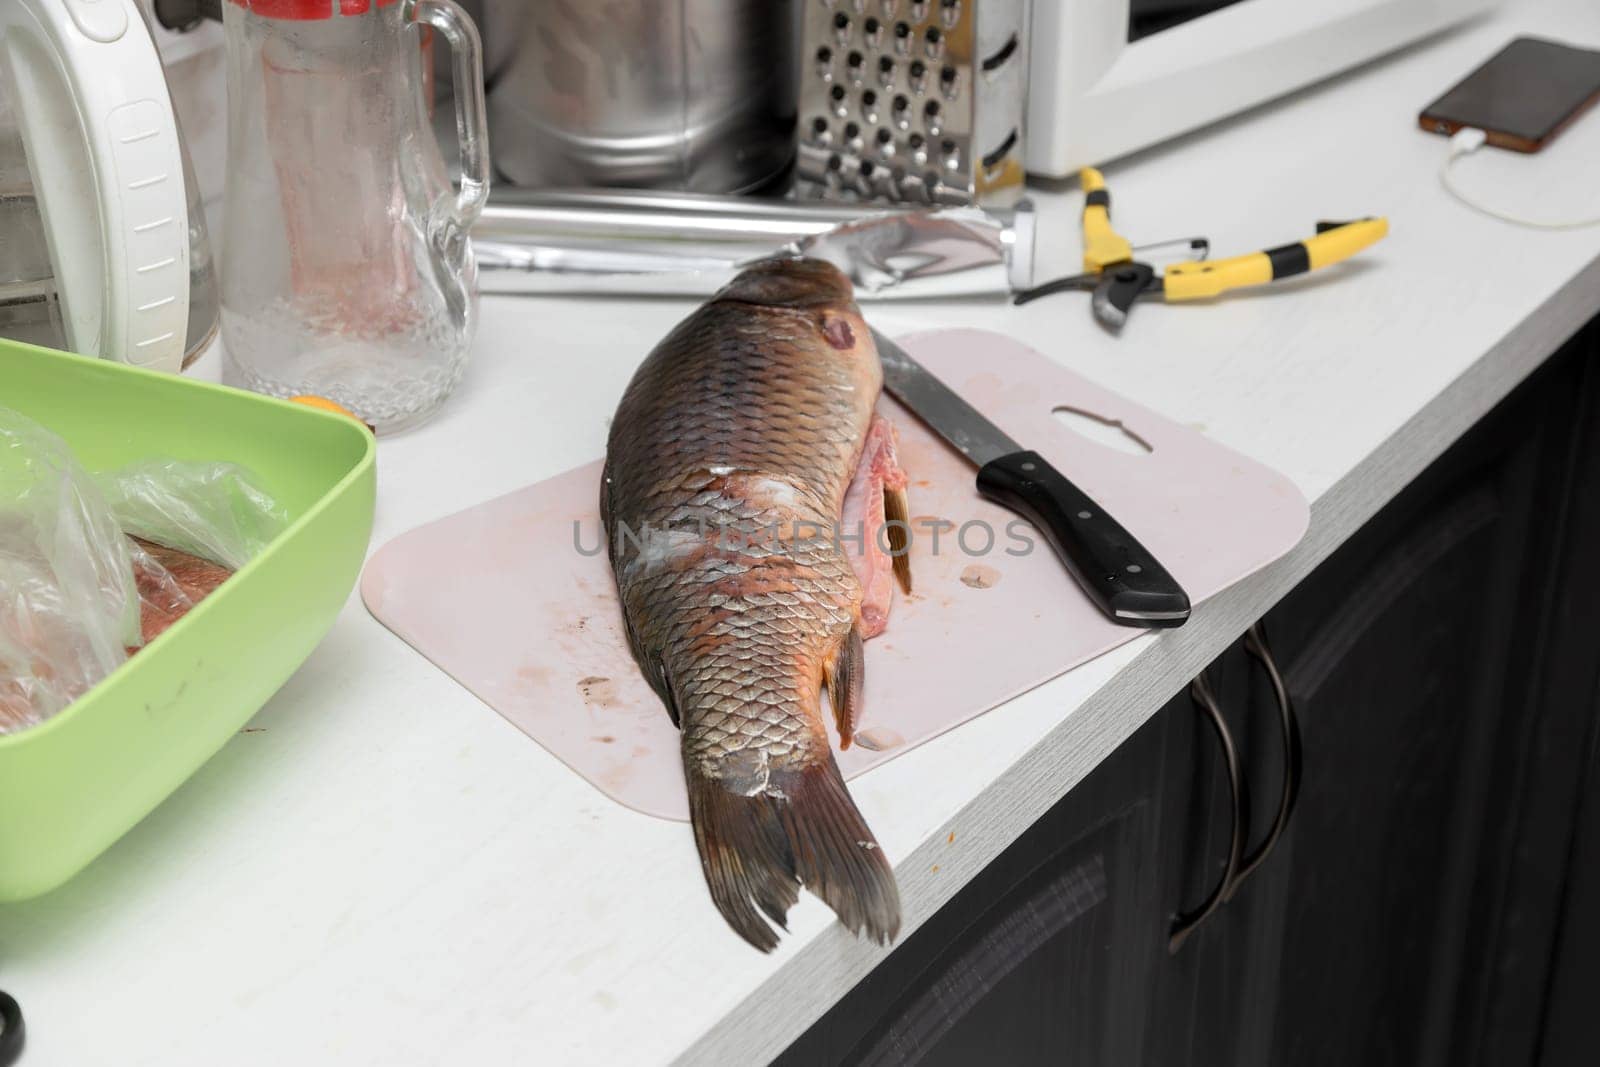 Carp fish and knife on a kitchen table